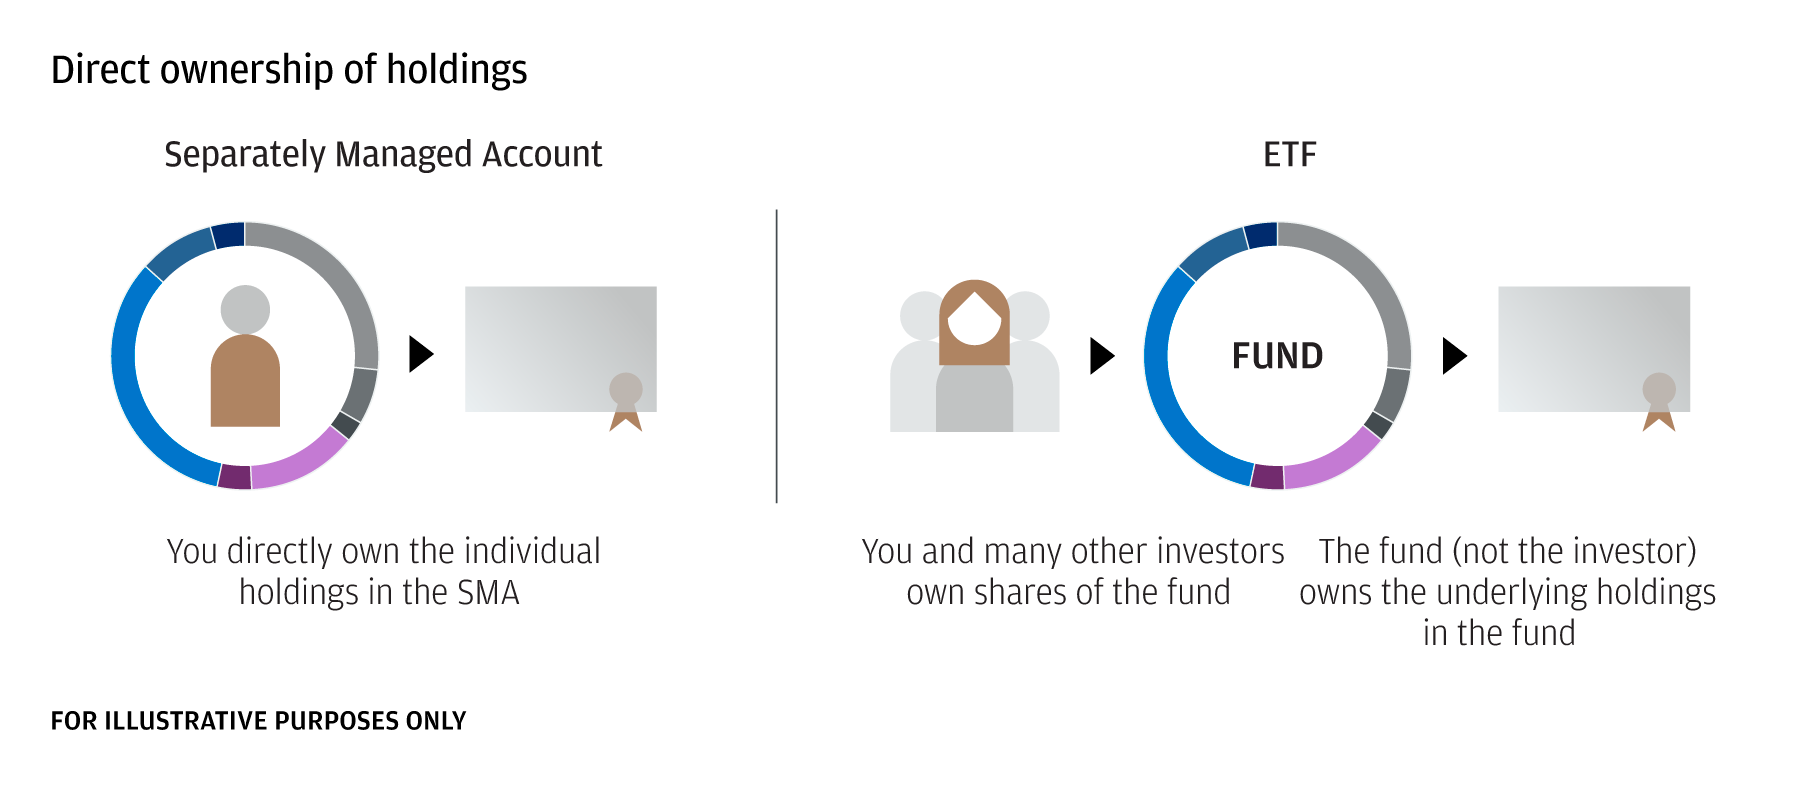 Illustration showing the high-level difference between an SMA and an ETF. SMAs provide investors with direct ownership of holdings, whereas ETFs pool investors’ money into a fund that invests into underlying holdings.